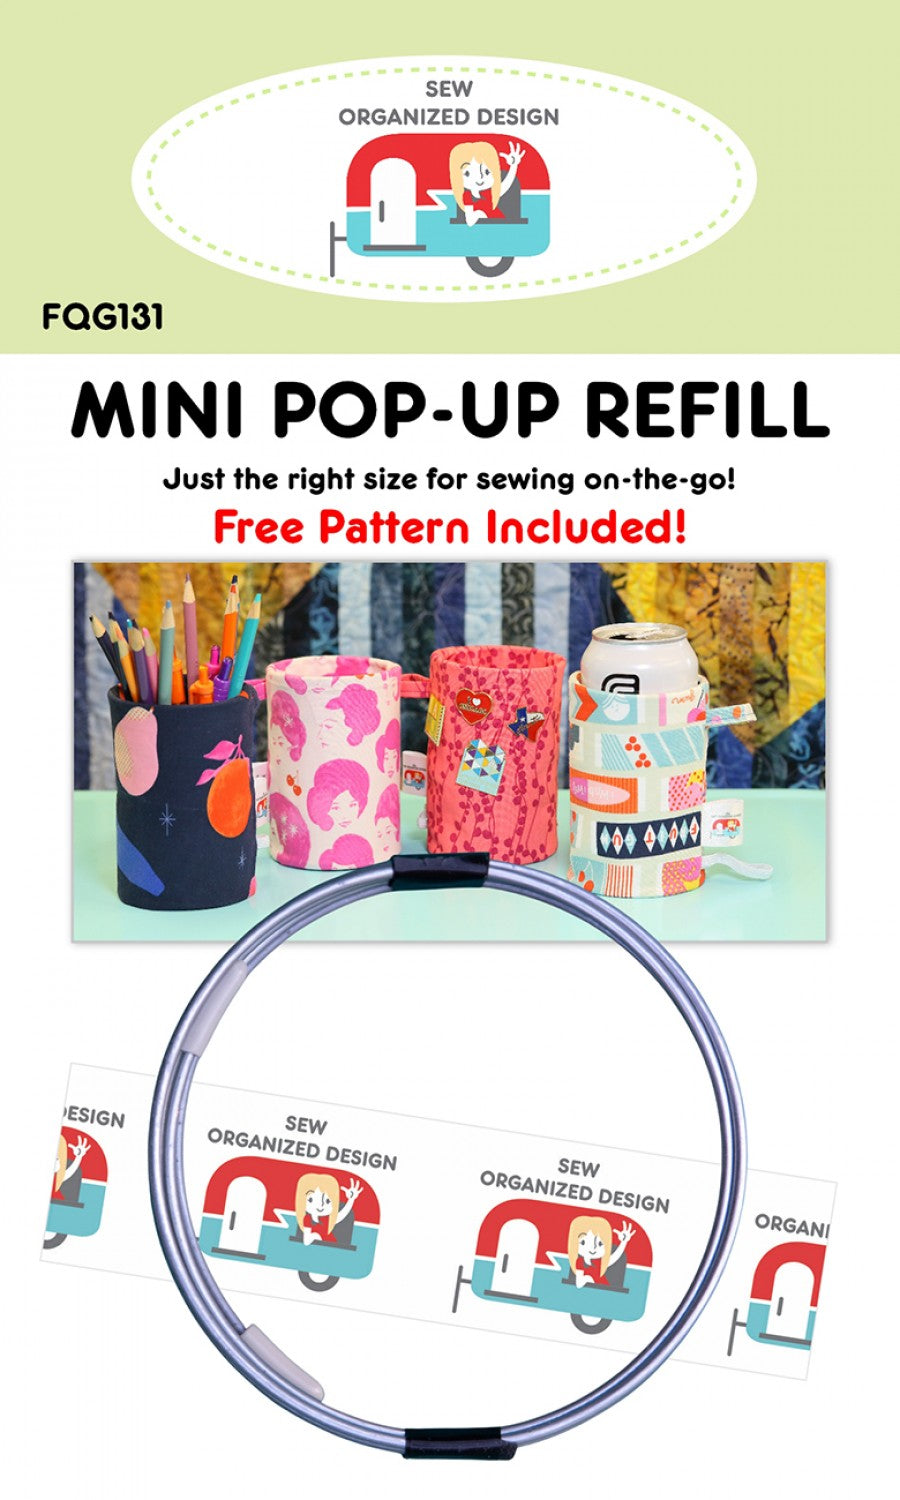 Mini 3-Inch Pop-Up Refill with Pattern by Joanne Hillestad for Sew Organized Design